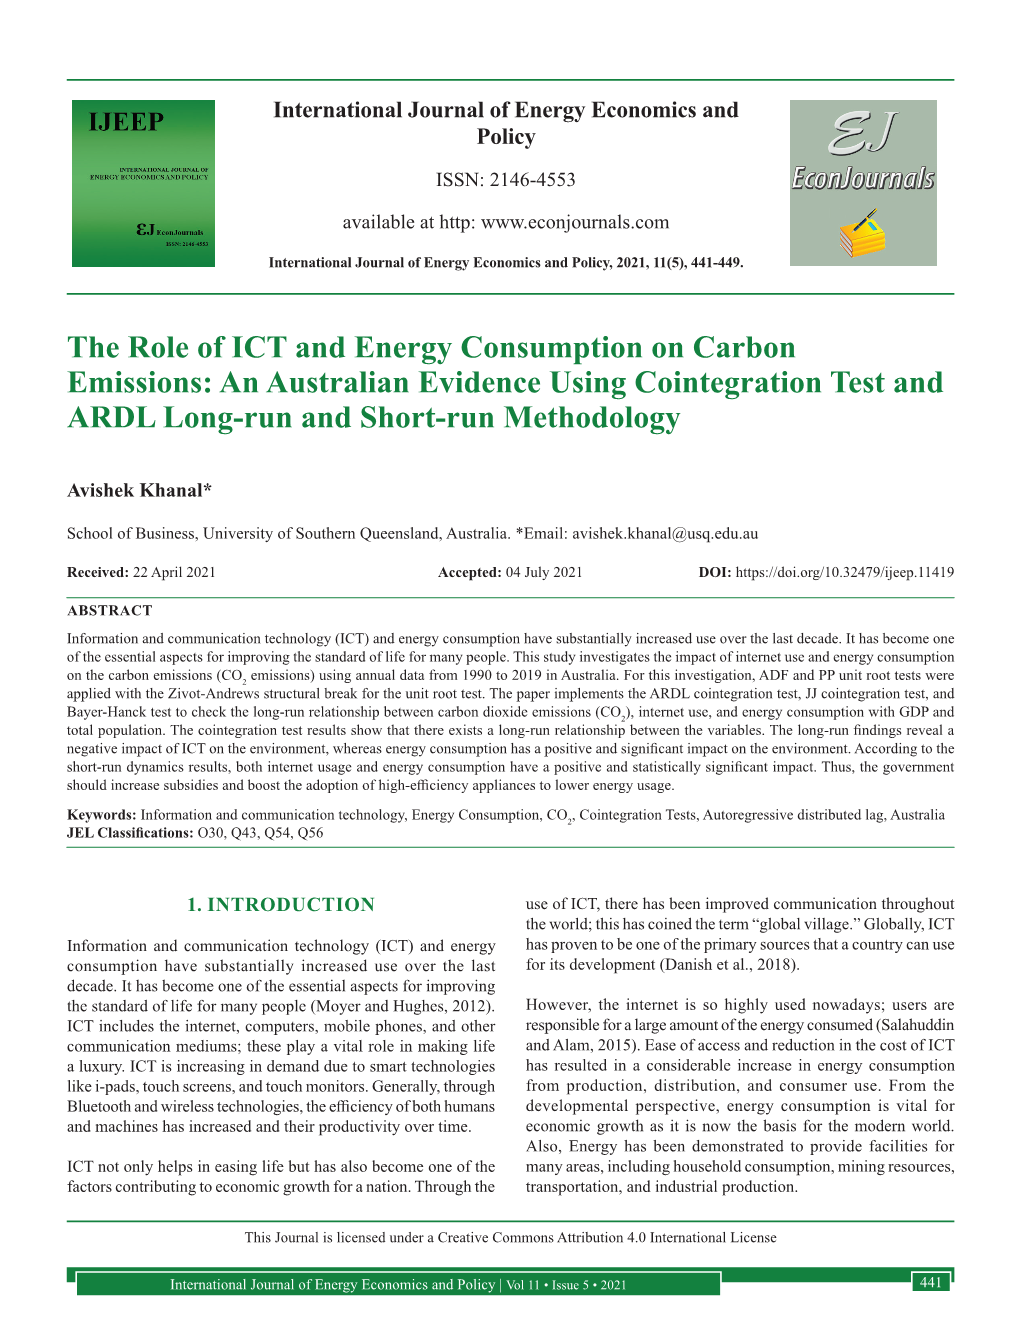 The Role of ICT and Energy Consumption on Carbon Emissions: an Australian Evidence Using Cointegration Test and ARDL Long-Run and Short-Run Methodology